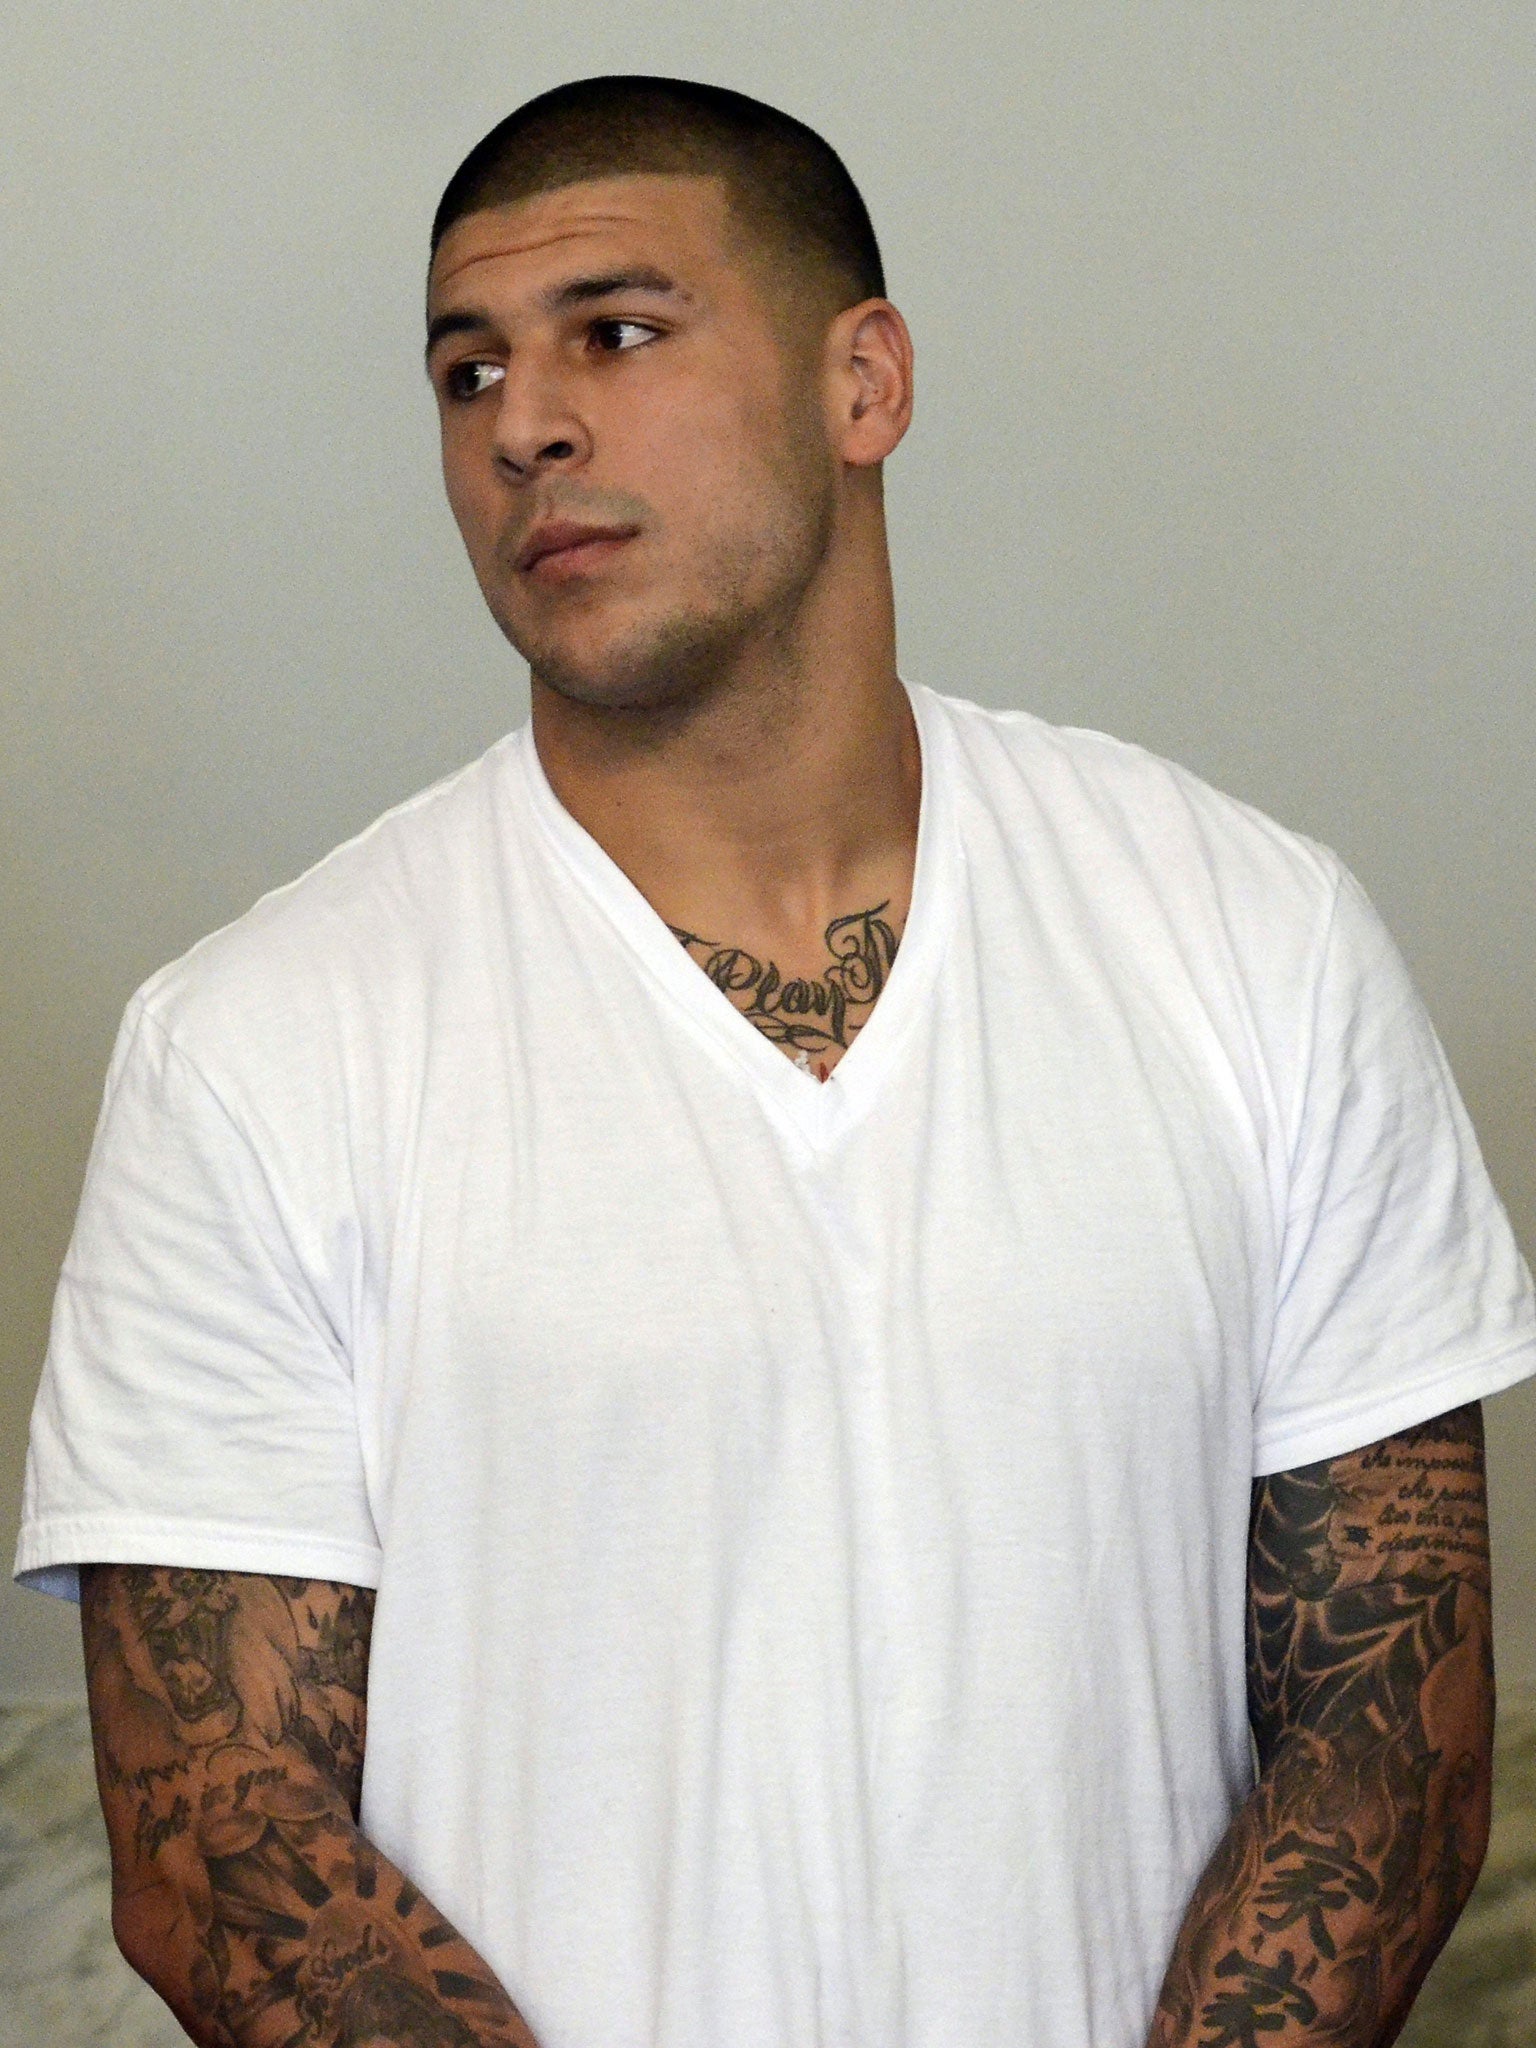 In final hours, NFL star Aaron Hernandez thought of family, not football